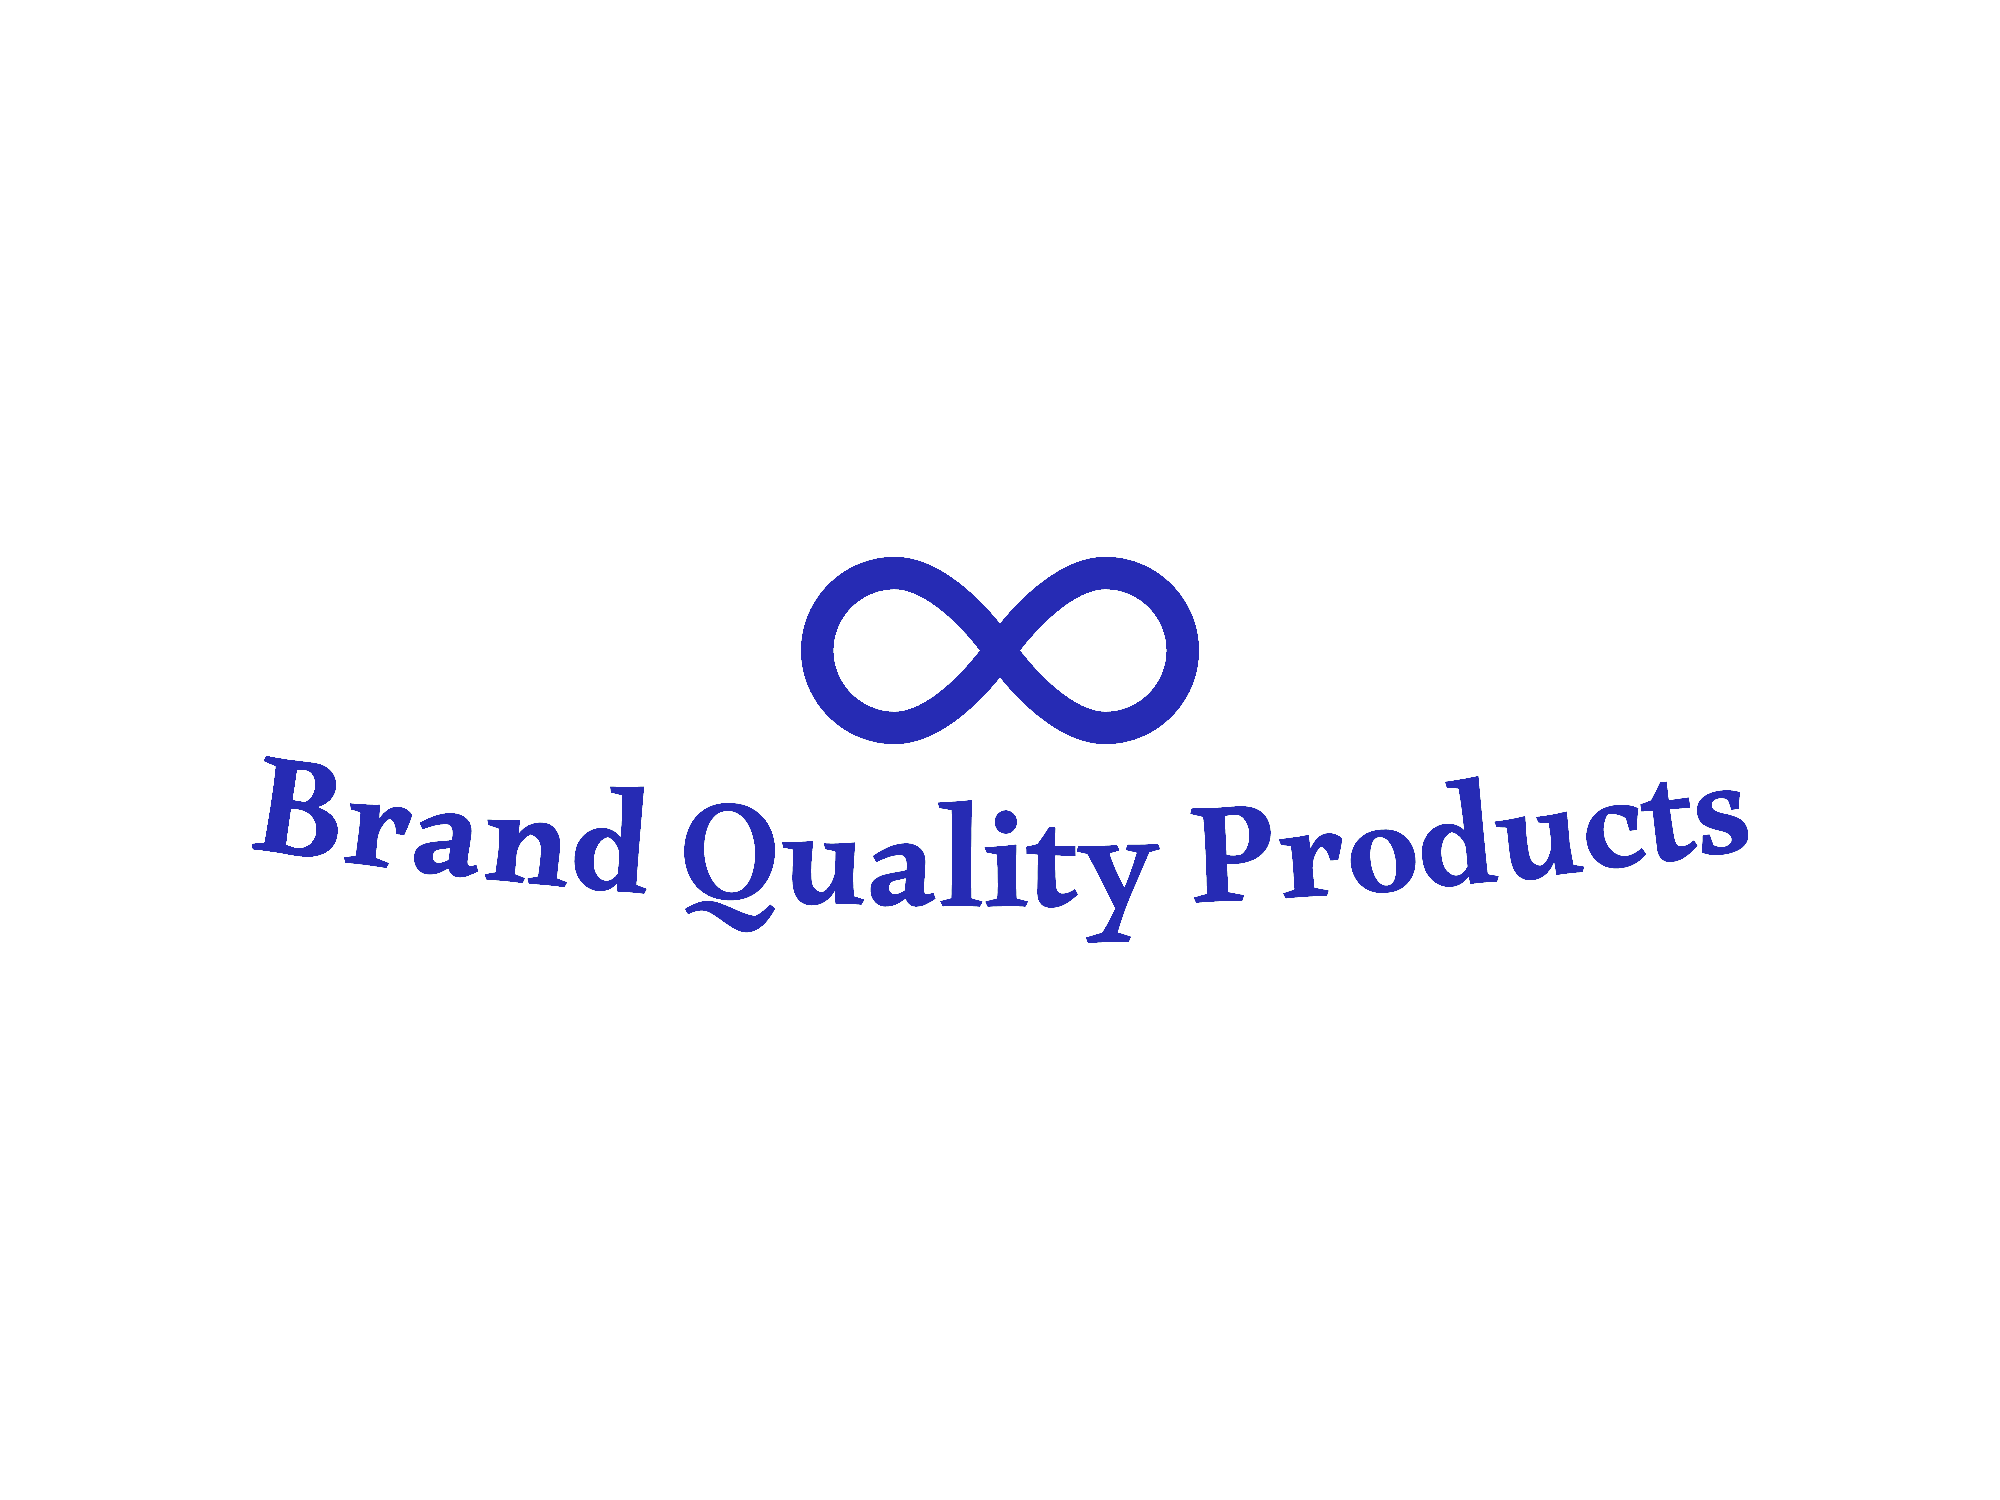 Brand Quality Products Logo